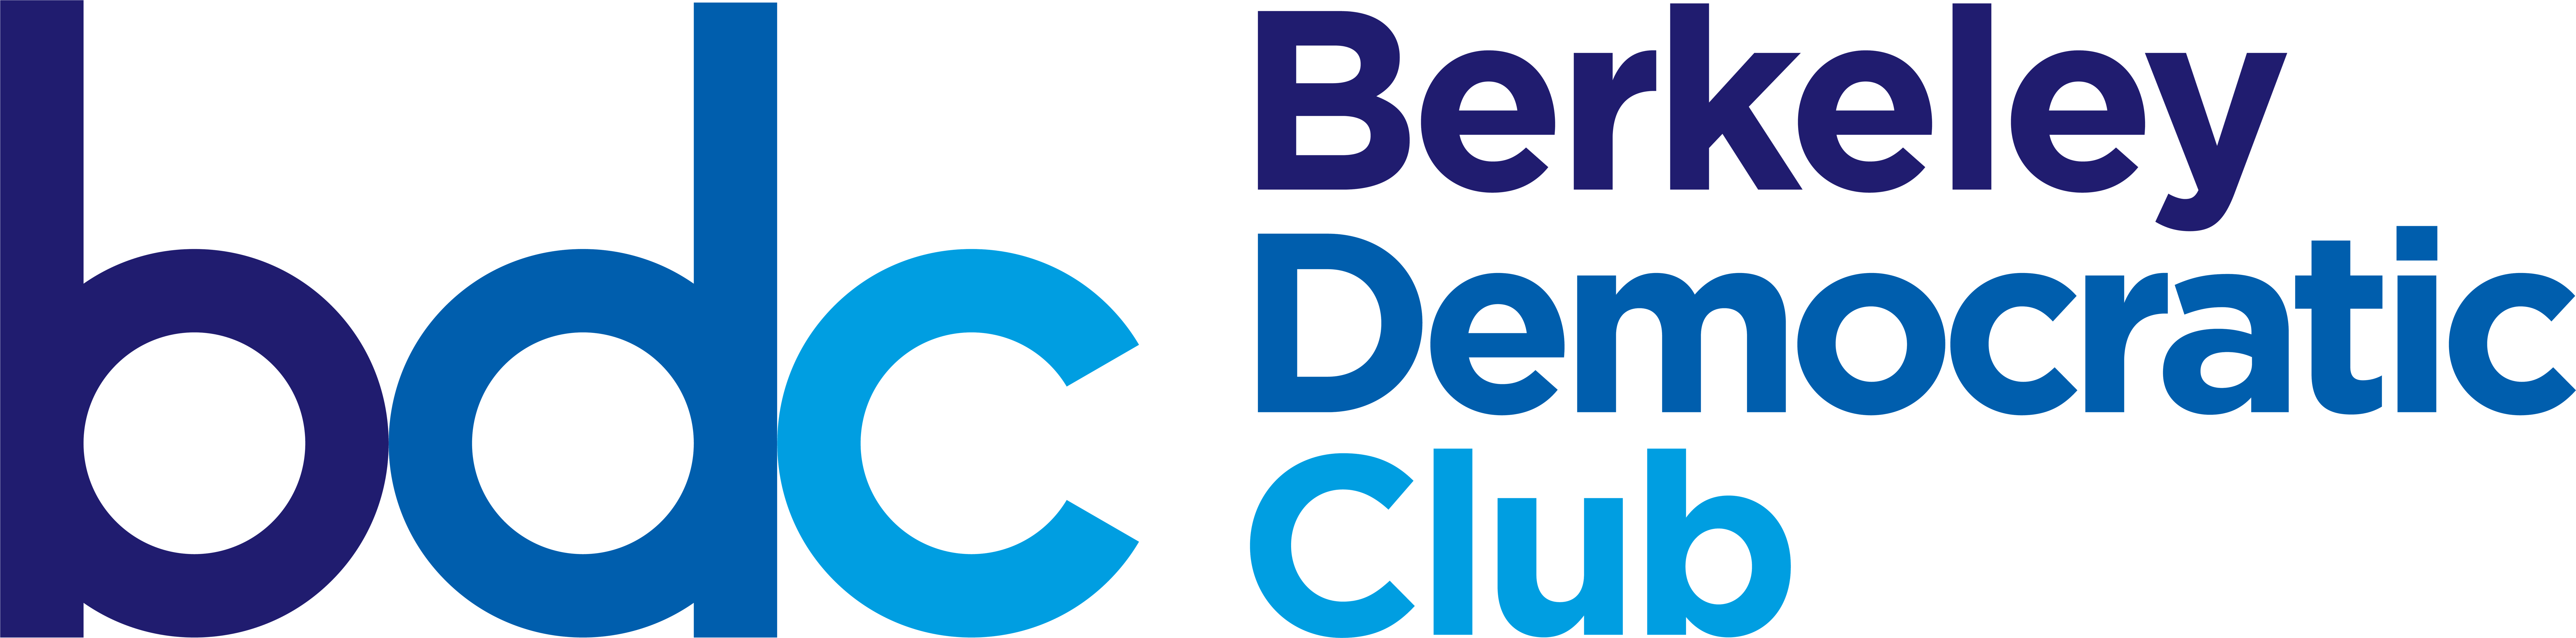 The Berkeley Democratic Club - Chase Paymentech (12880x3532), Png Download